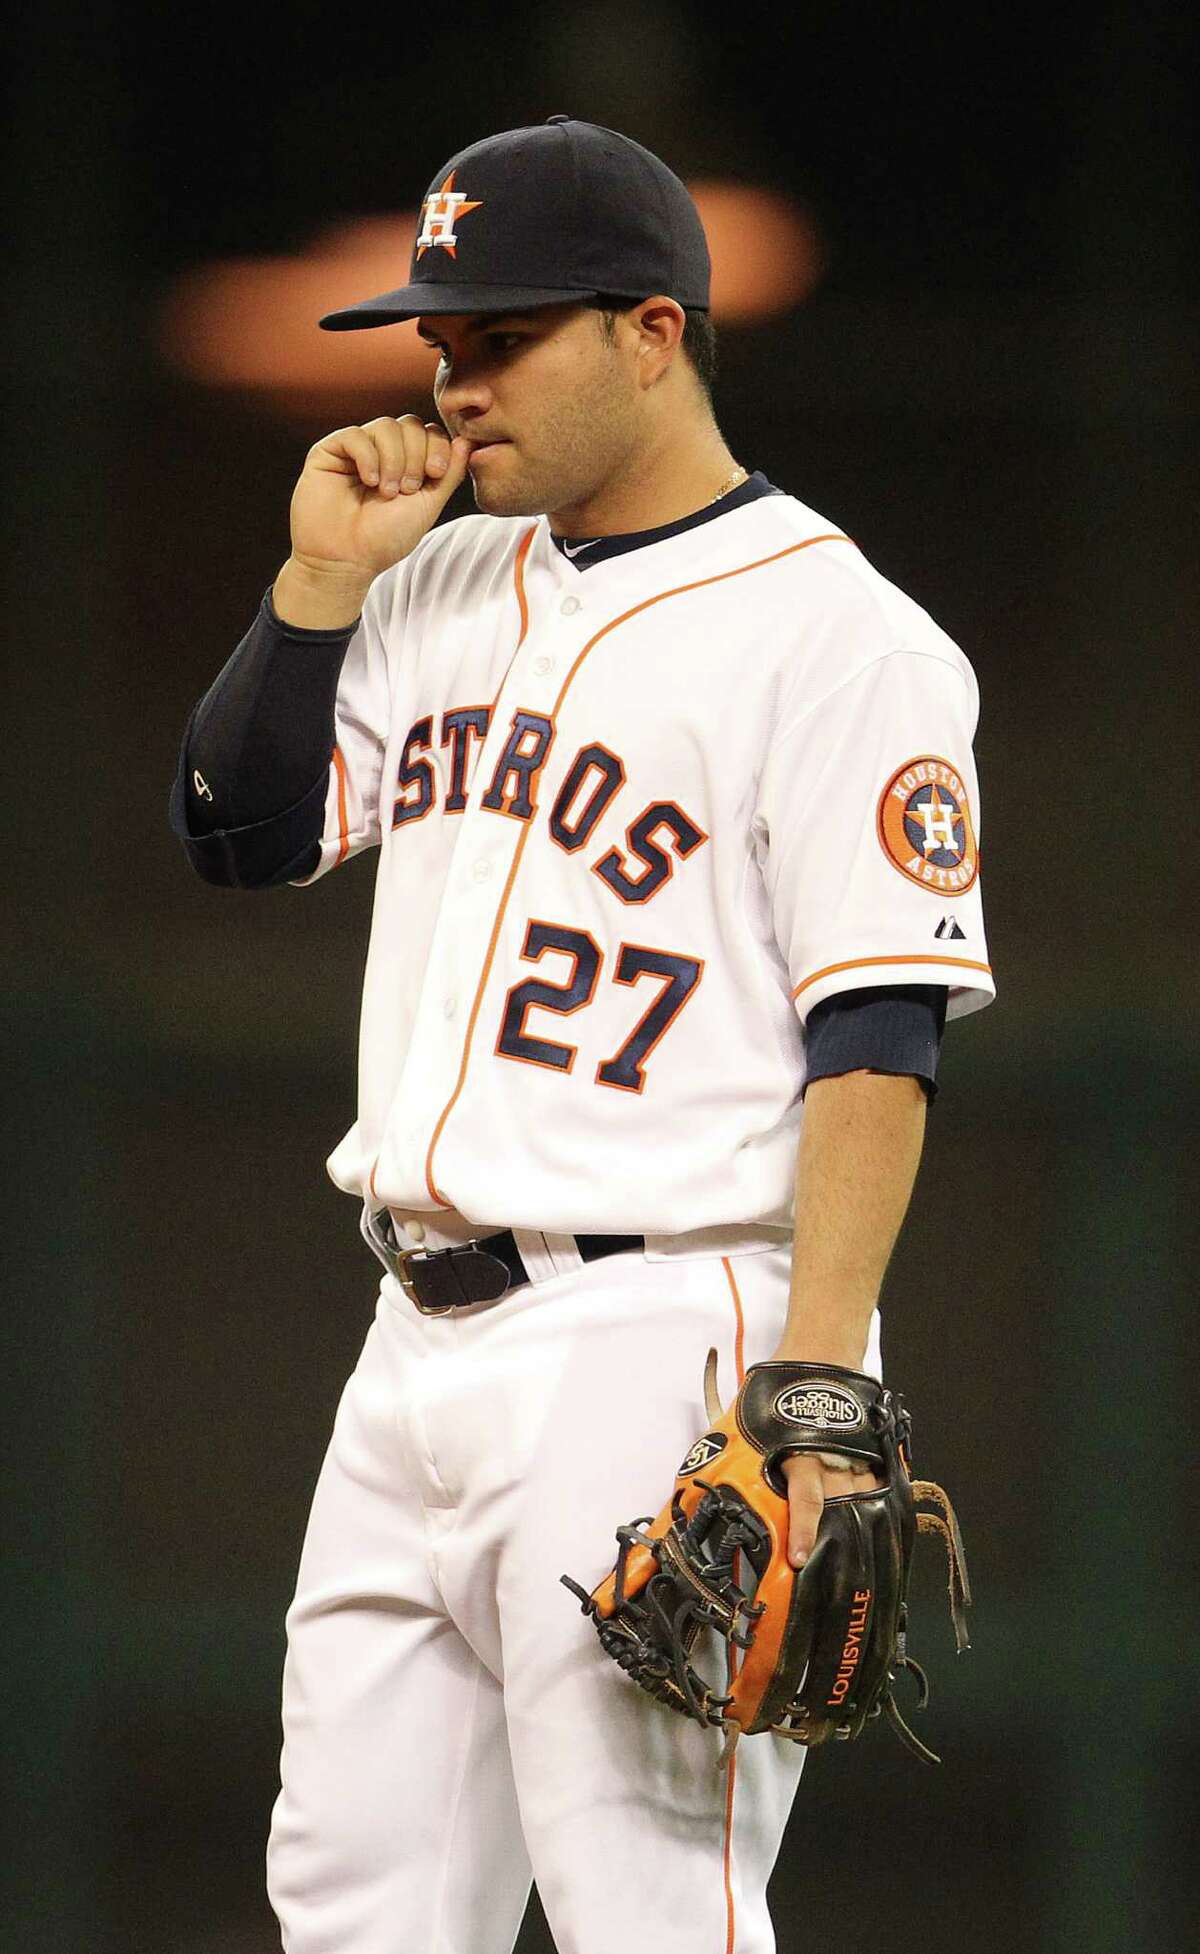 Jose Altuve tries to put aside his grieving while on the field.